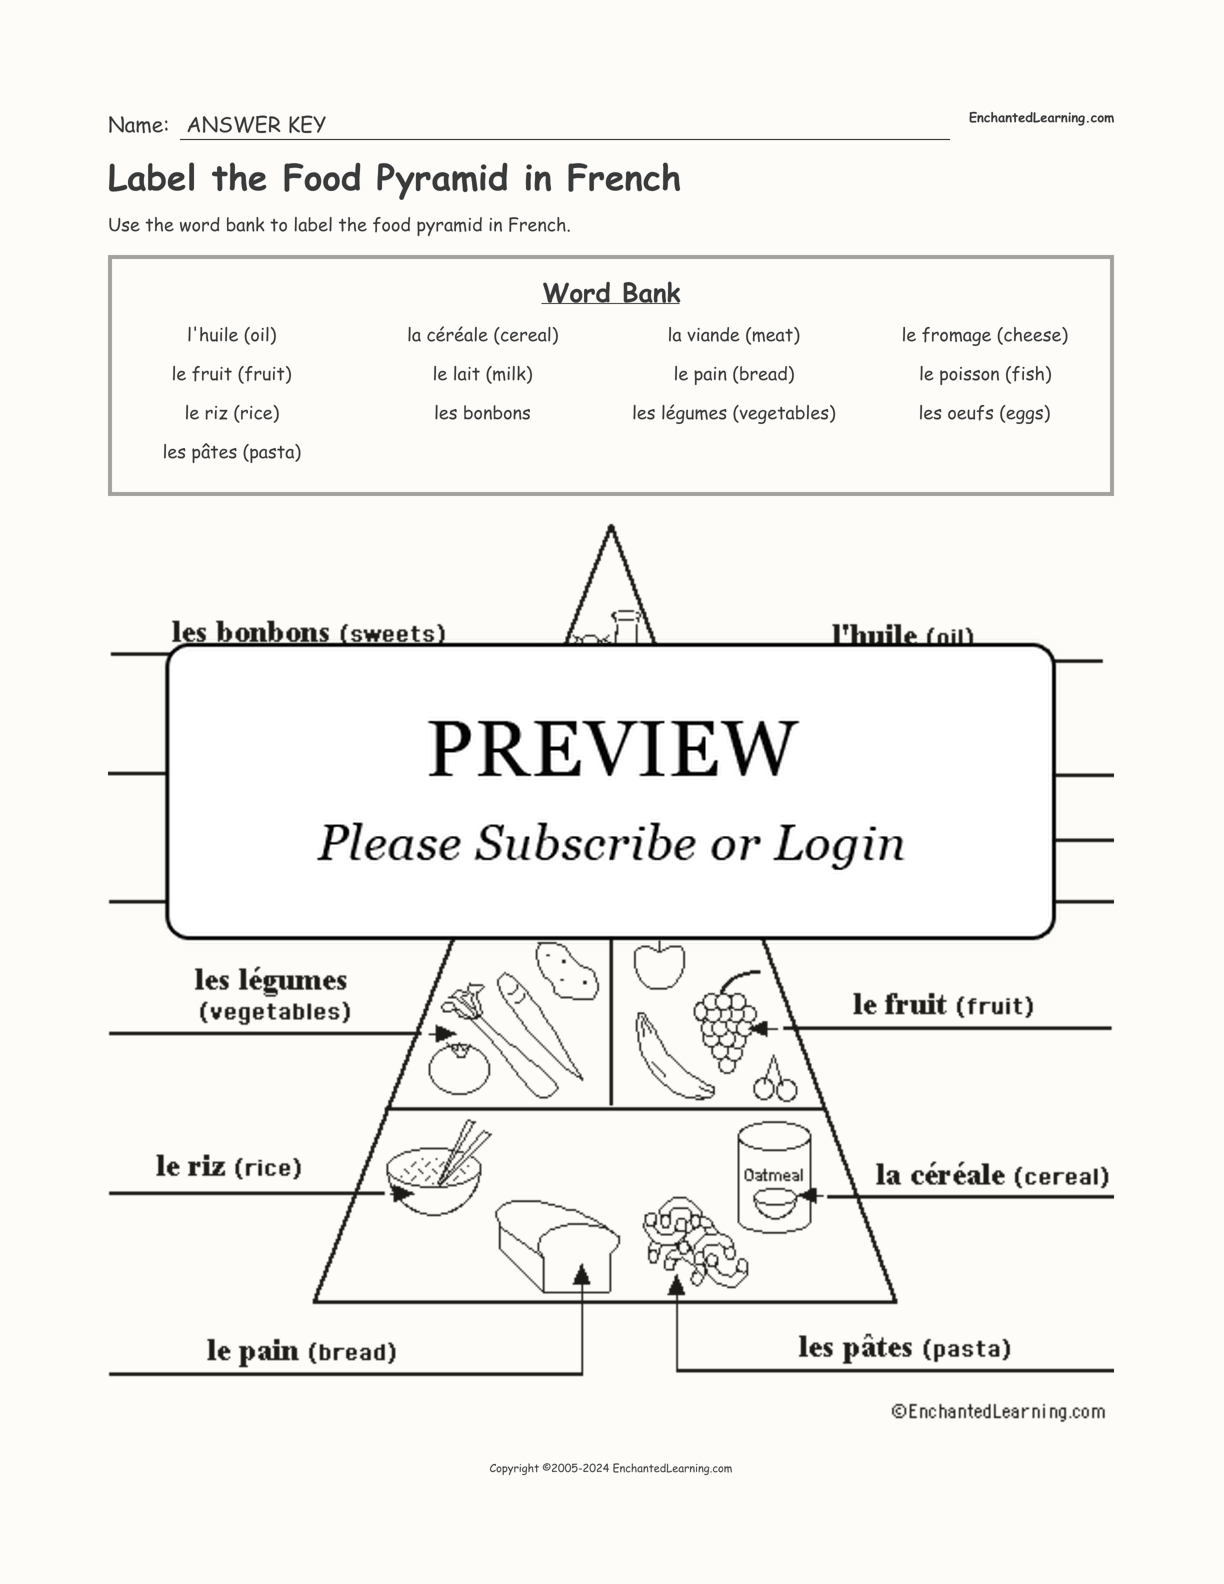 Label the Food Pyramid in French interactive worksheet page 2